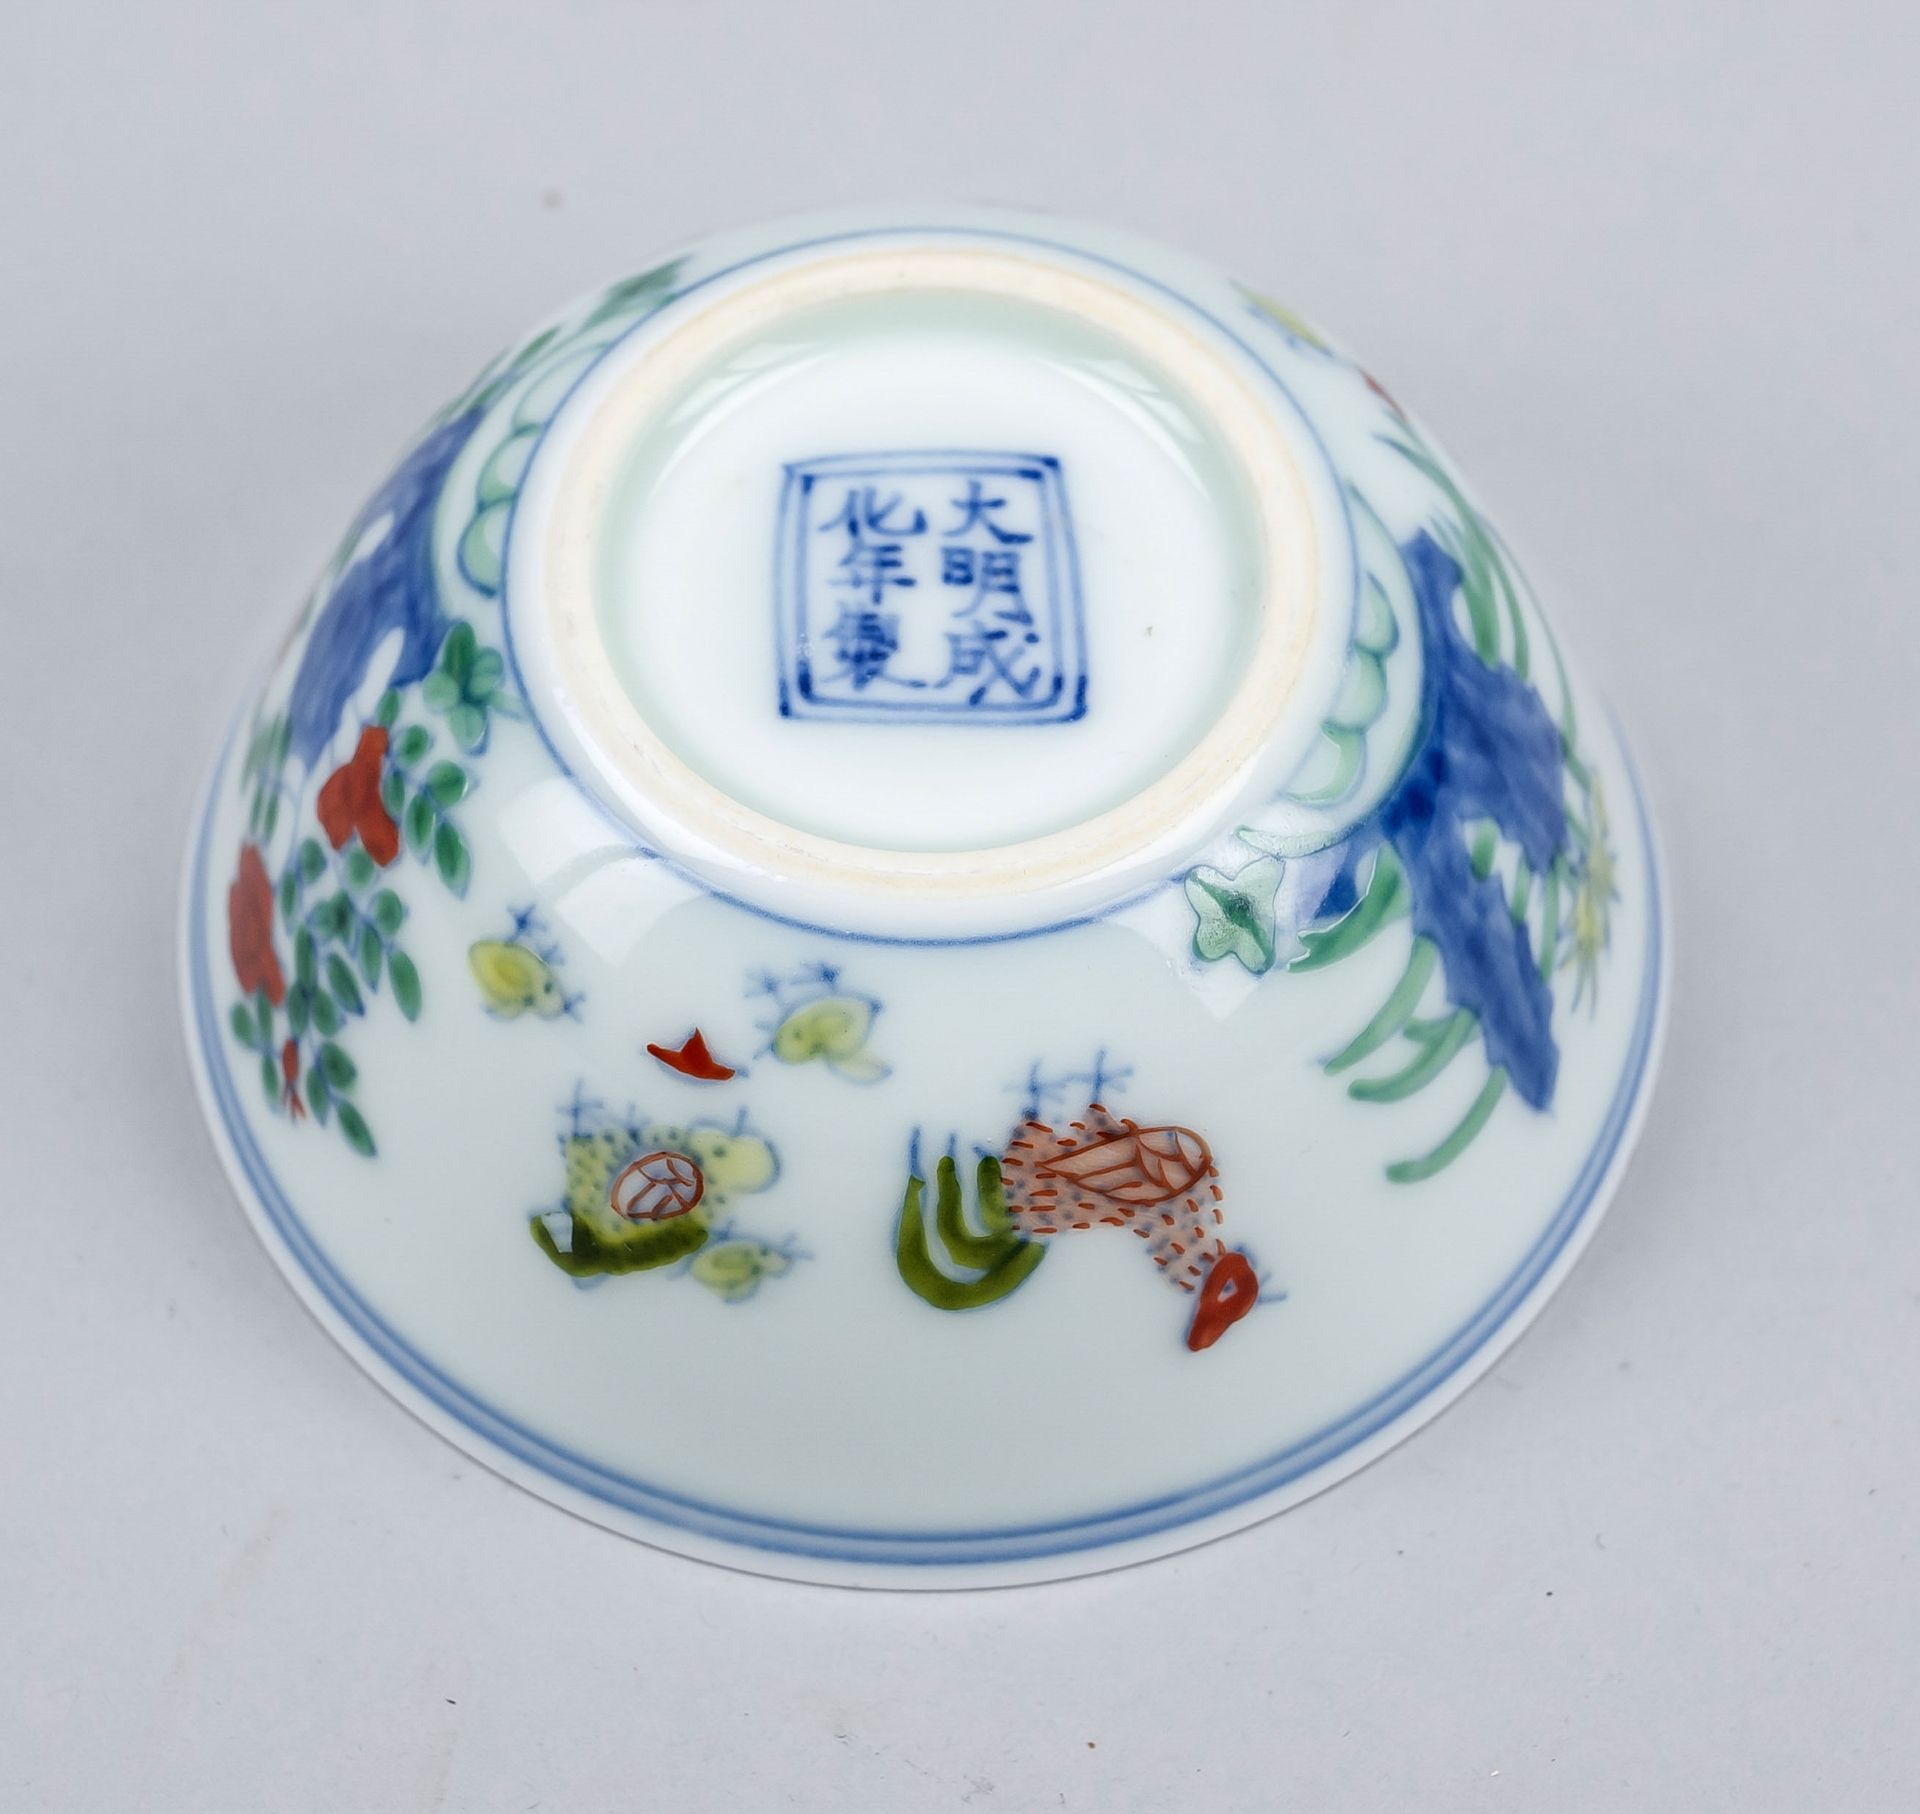 Doucai Chicken Cup (museum replica), China 20th century, in original box with leaflet, dimensions - Image 2 of 2